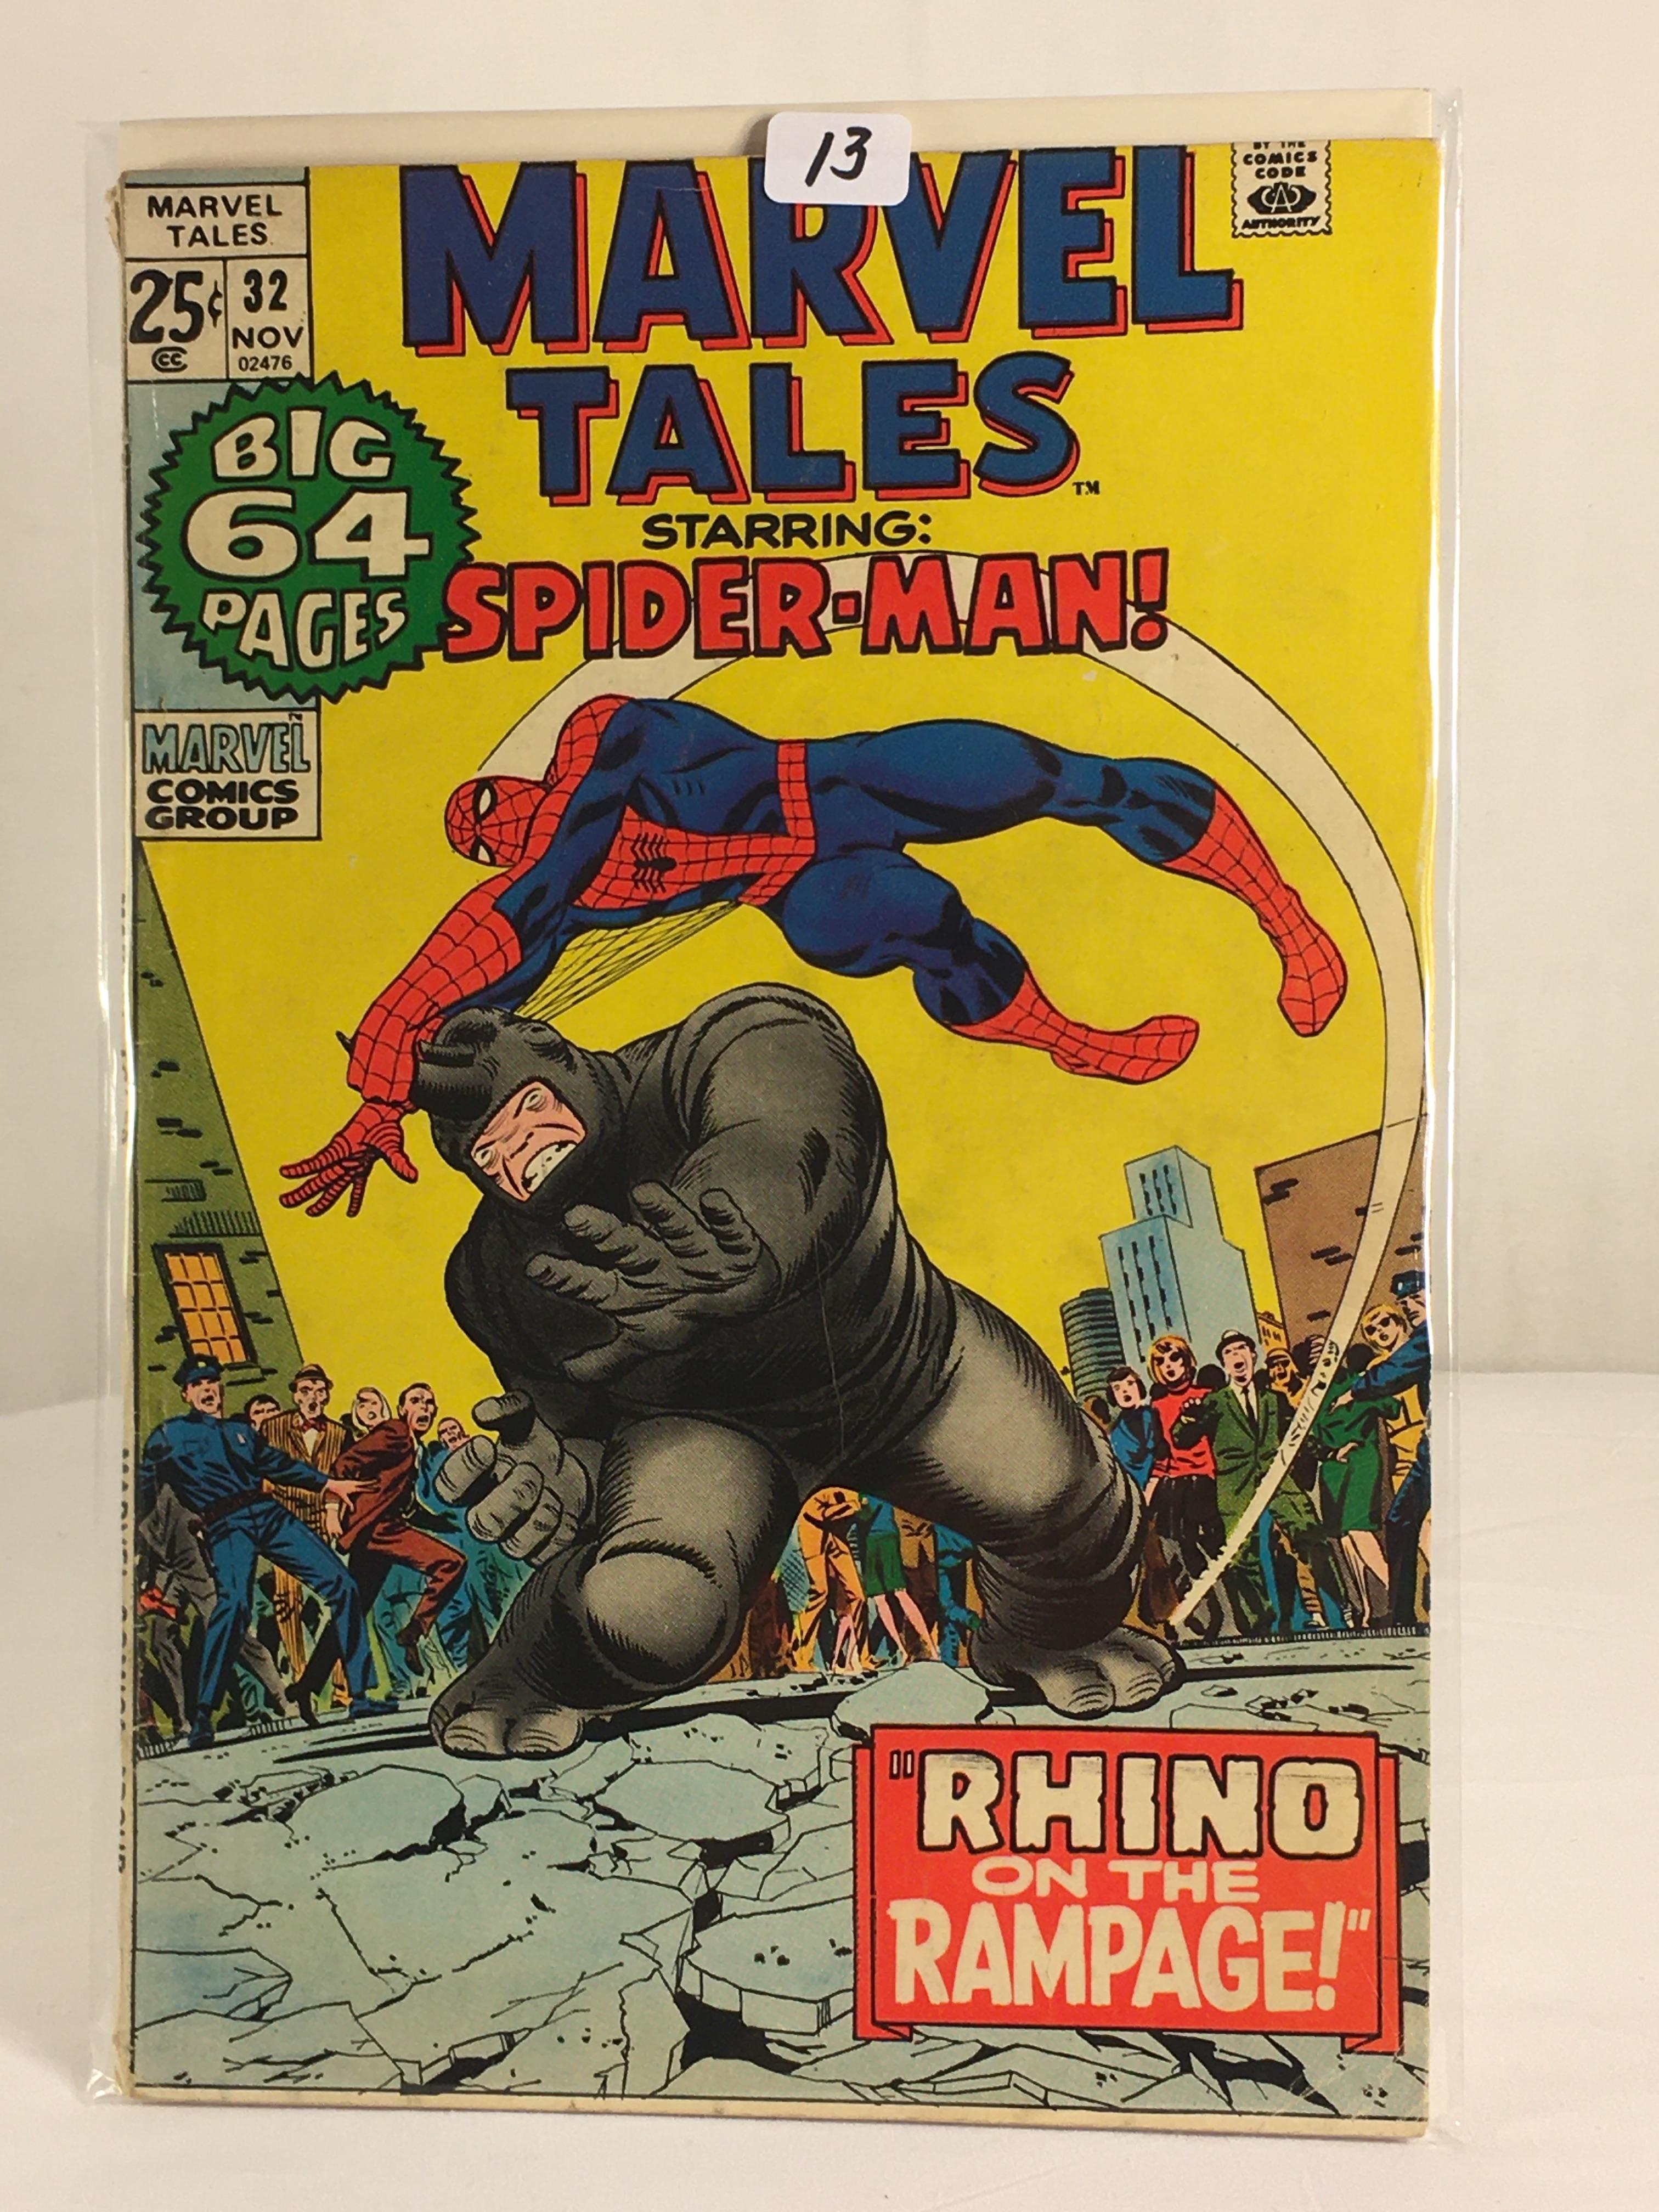 Collector Vintage Marvel Comics The Amazing Spider-man Marvel Tales Comic Book No.32